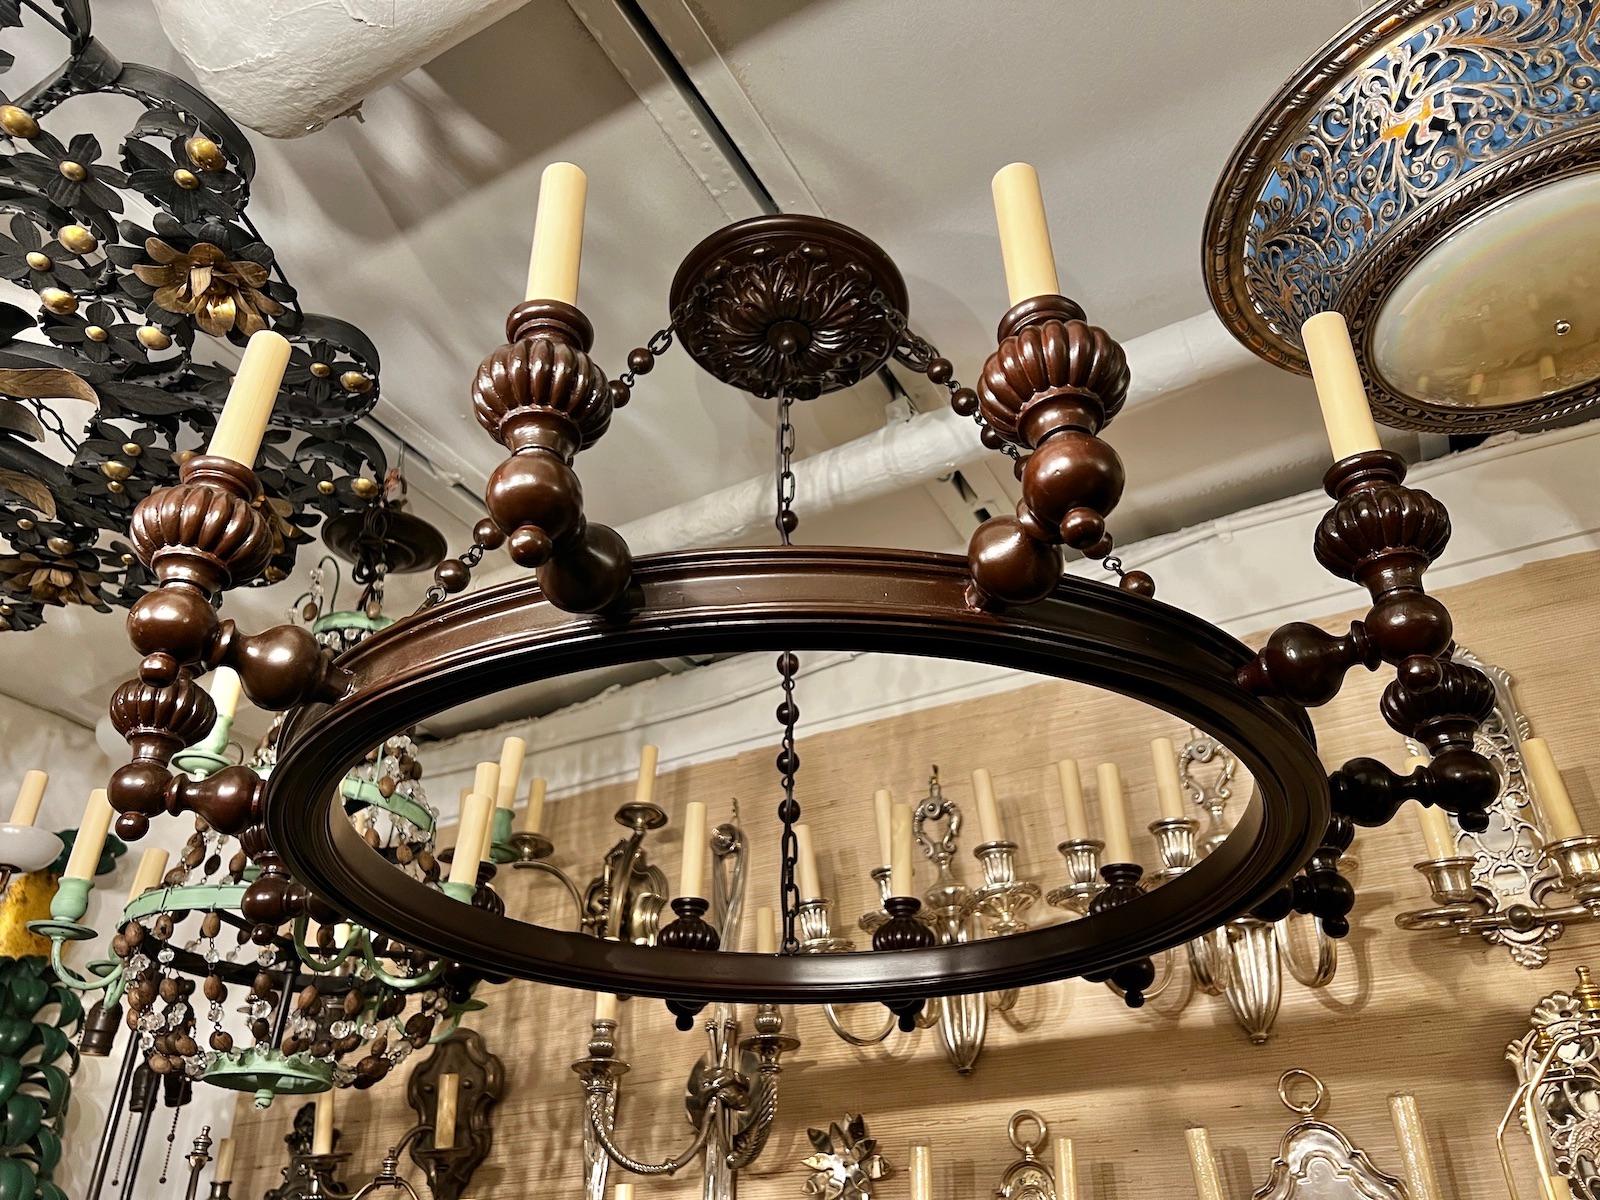 A circa 1940’s English neoclassic style carved wood chandelier with bronze chain.

Measurements:
Height: 23″
Diameter: 35″